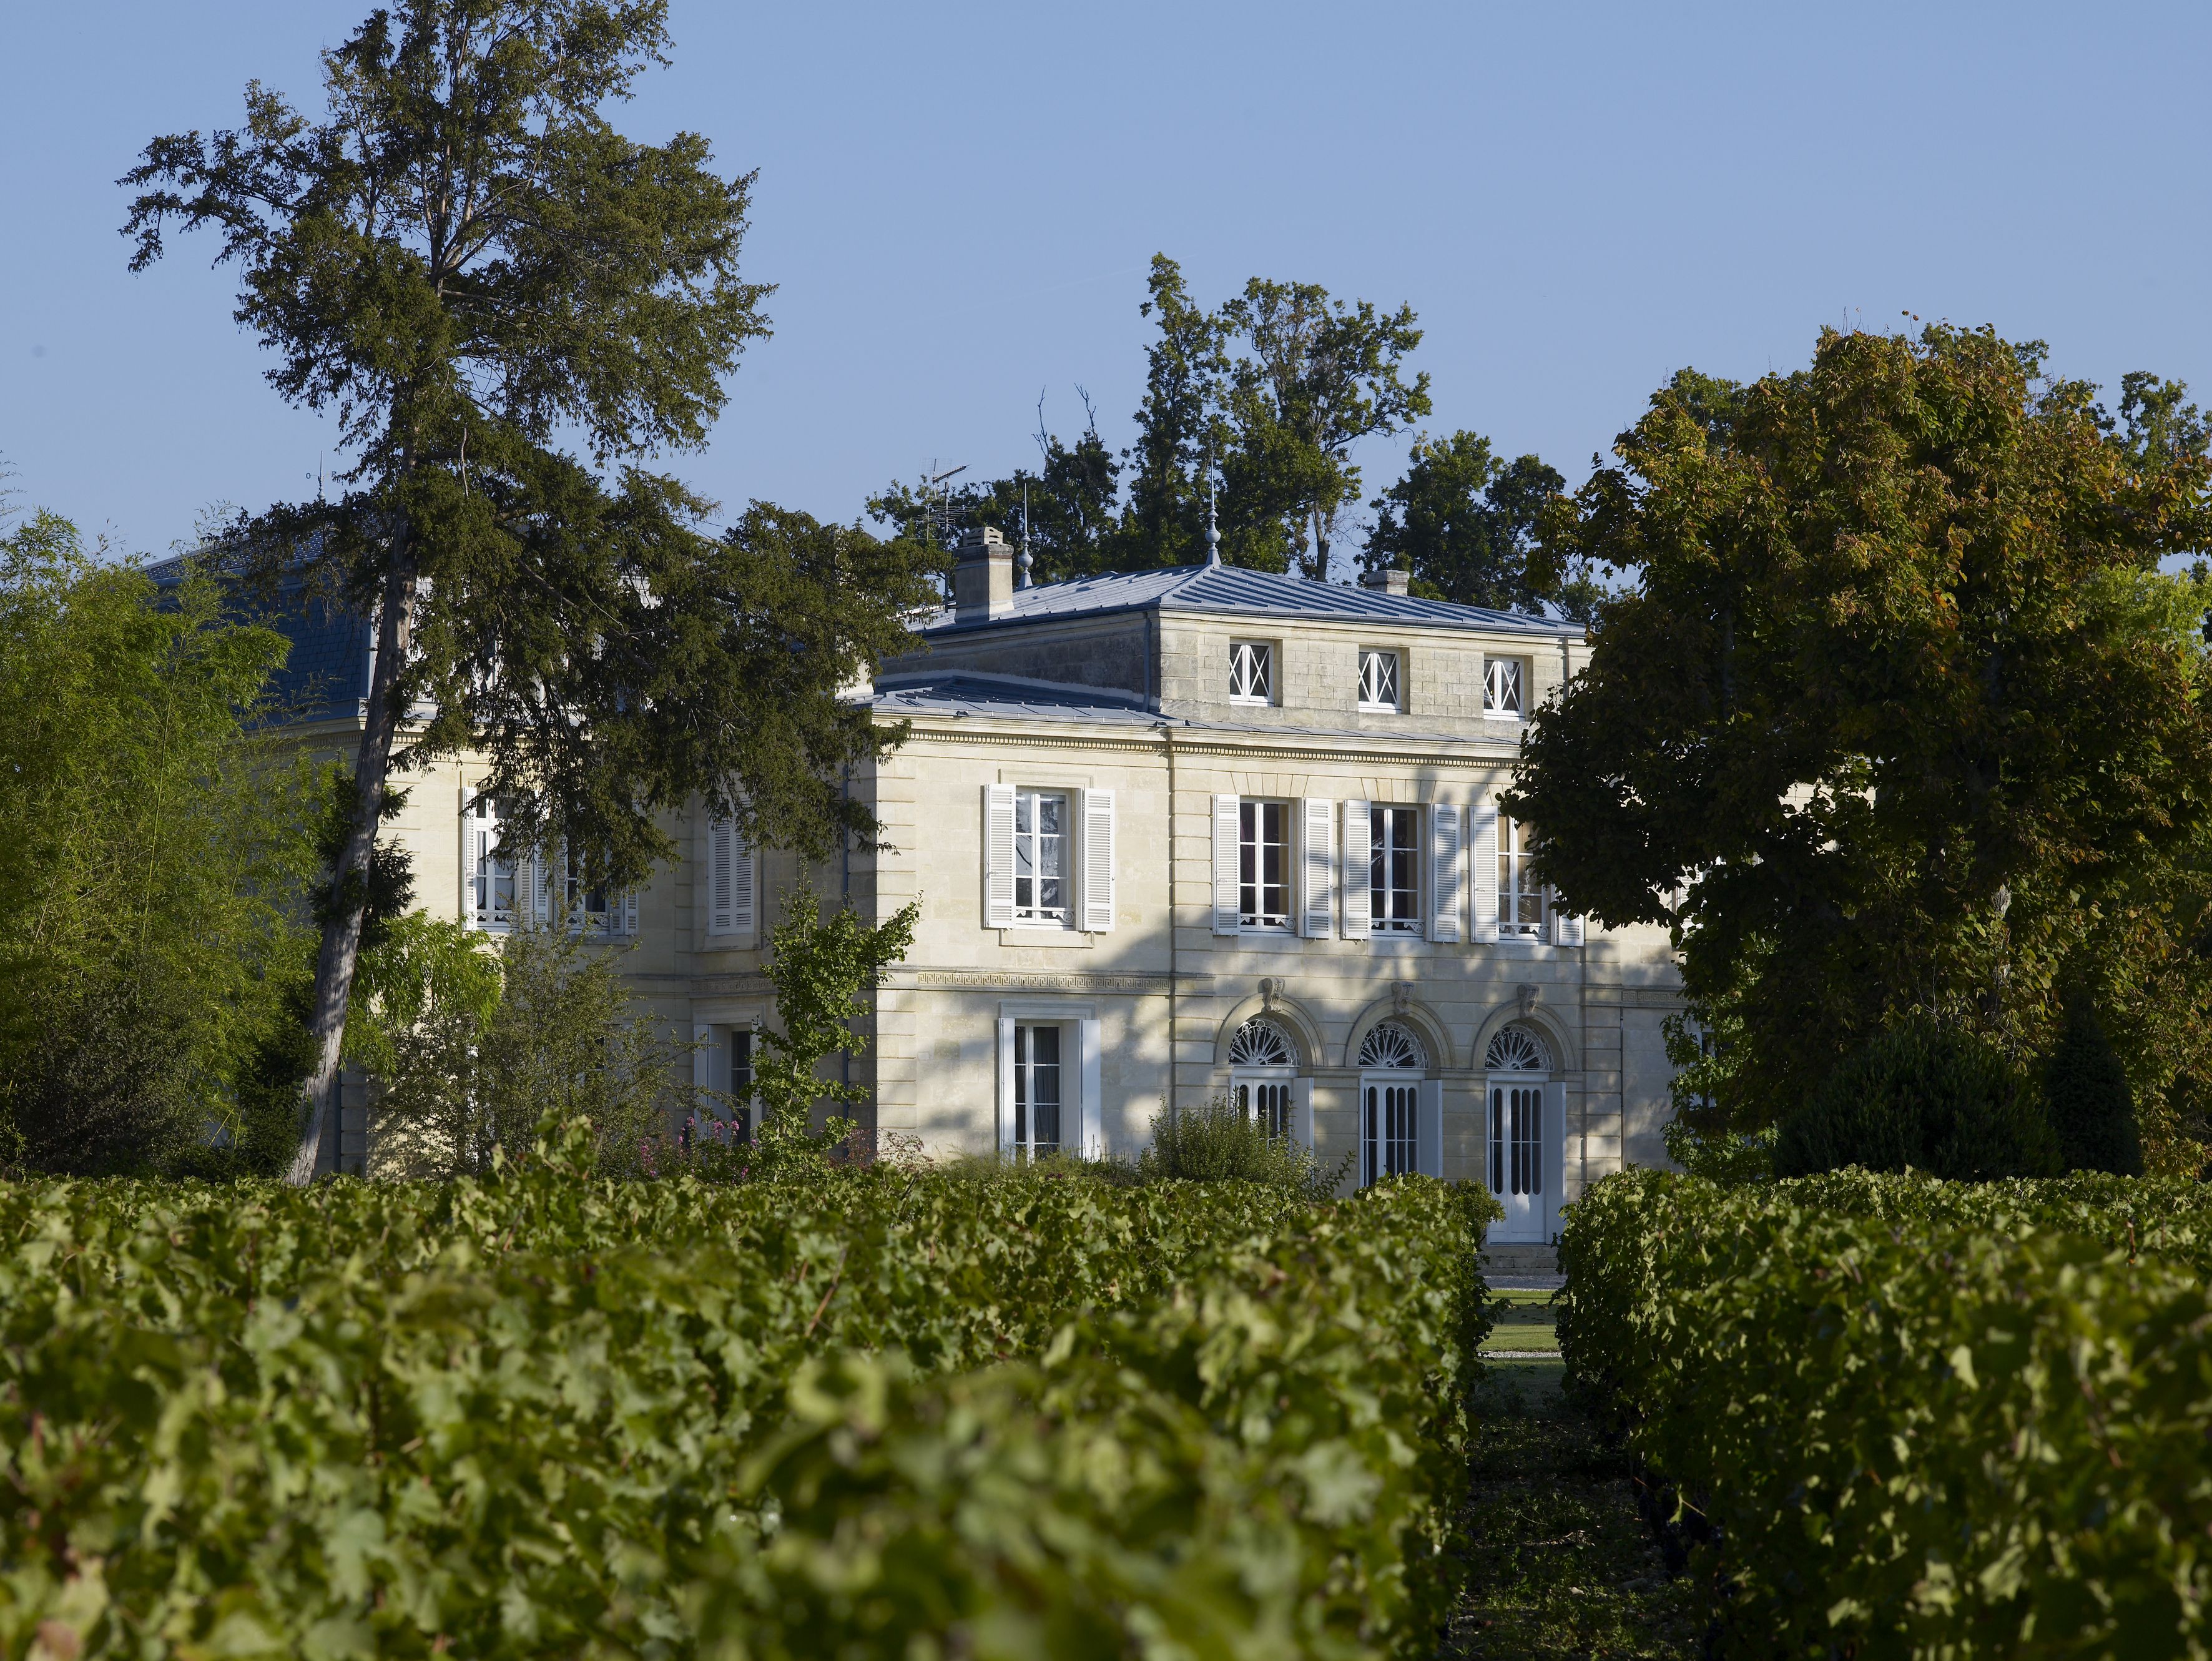 2005 wines from Medoc's left bank show a sense of restraint, with alcohol levels rarely exceeding 13.5 per cent by volume. 